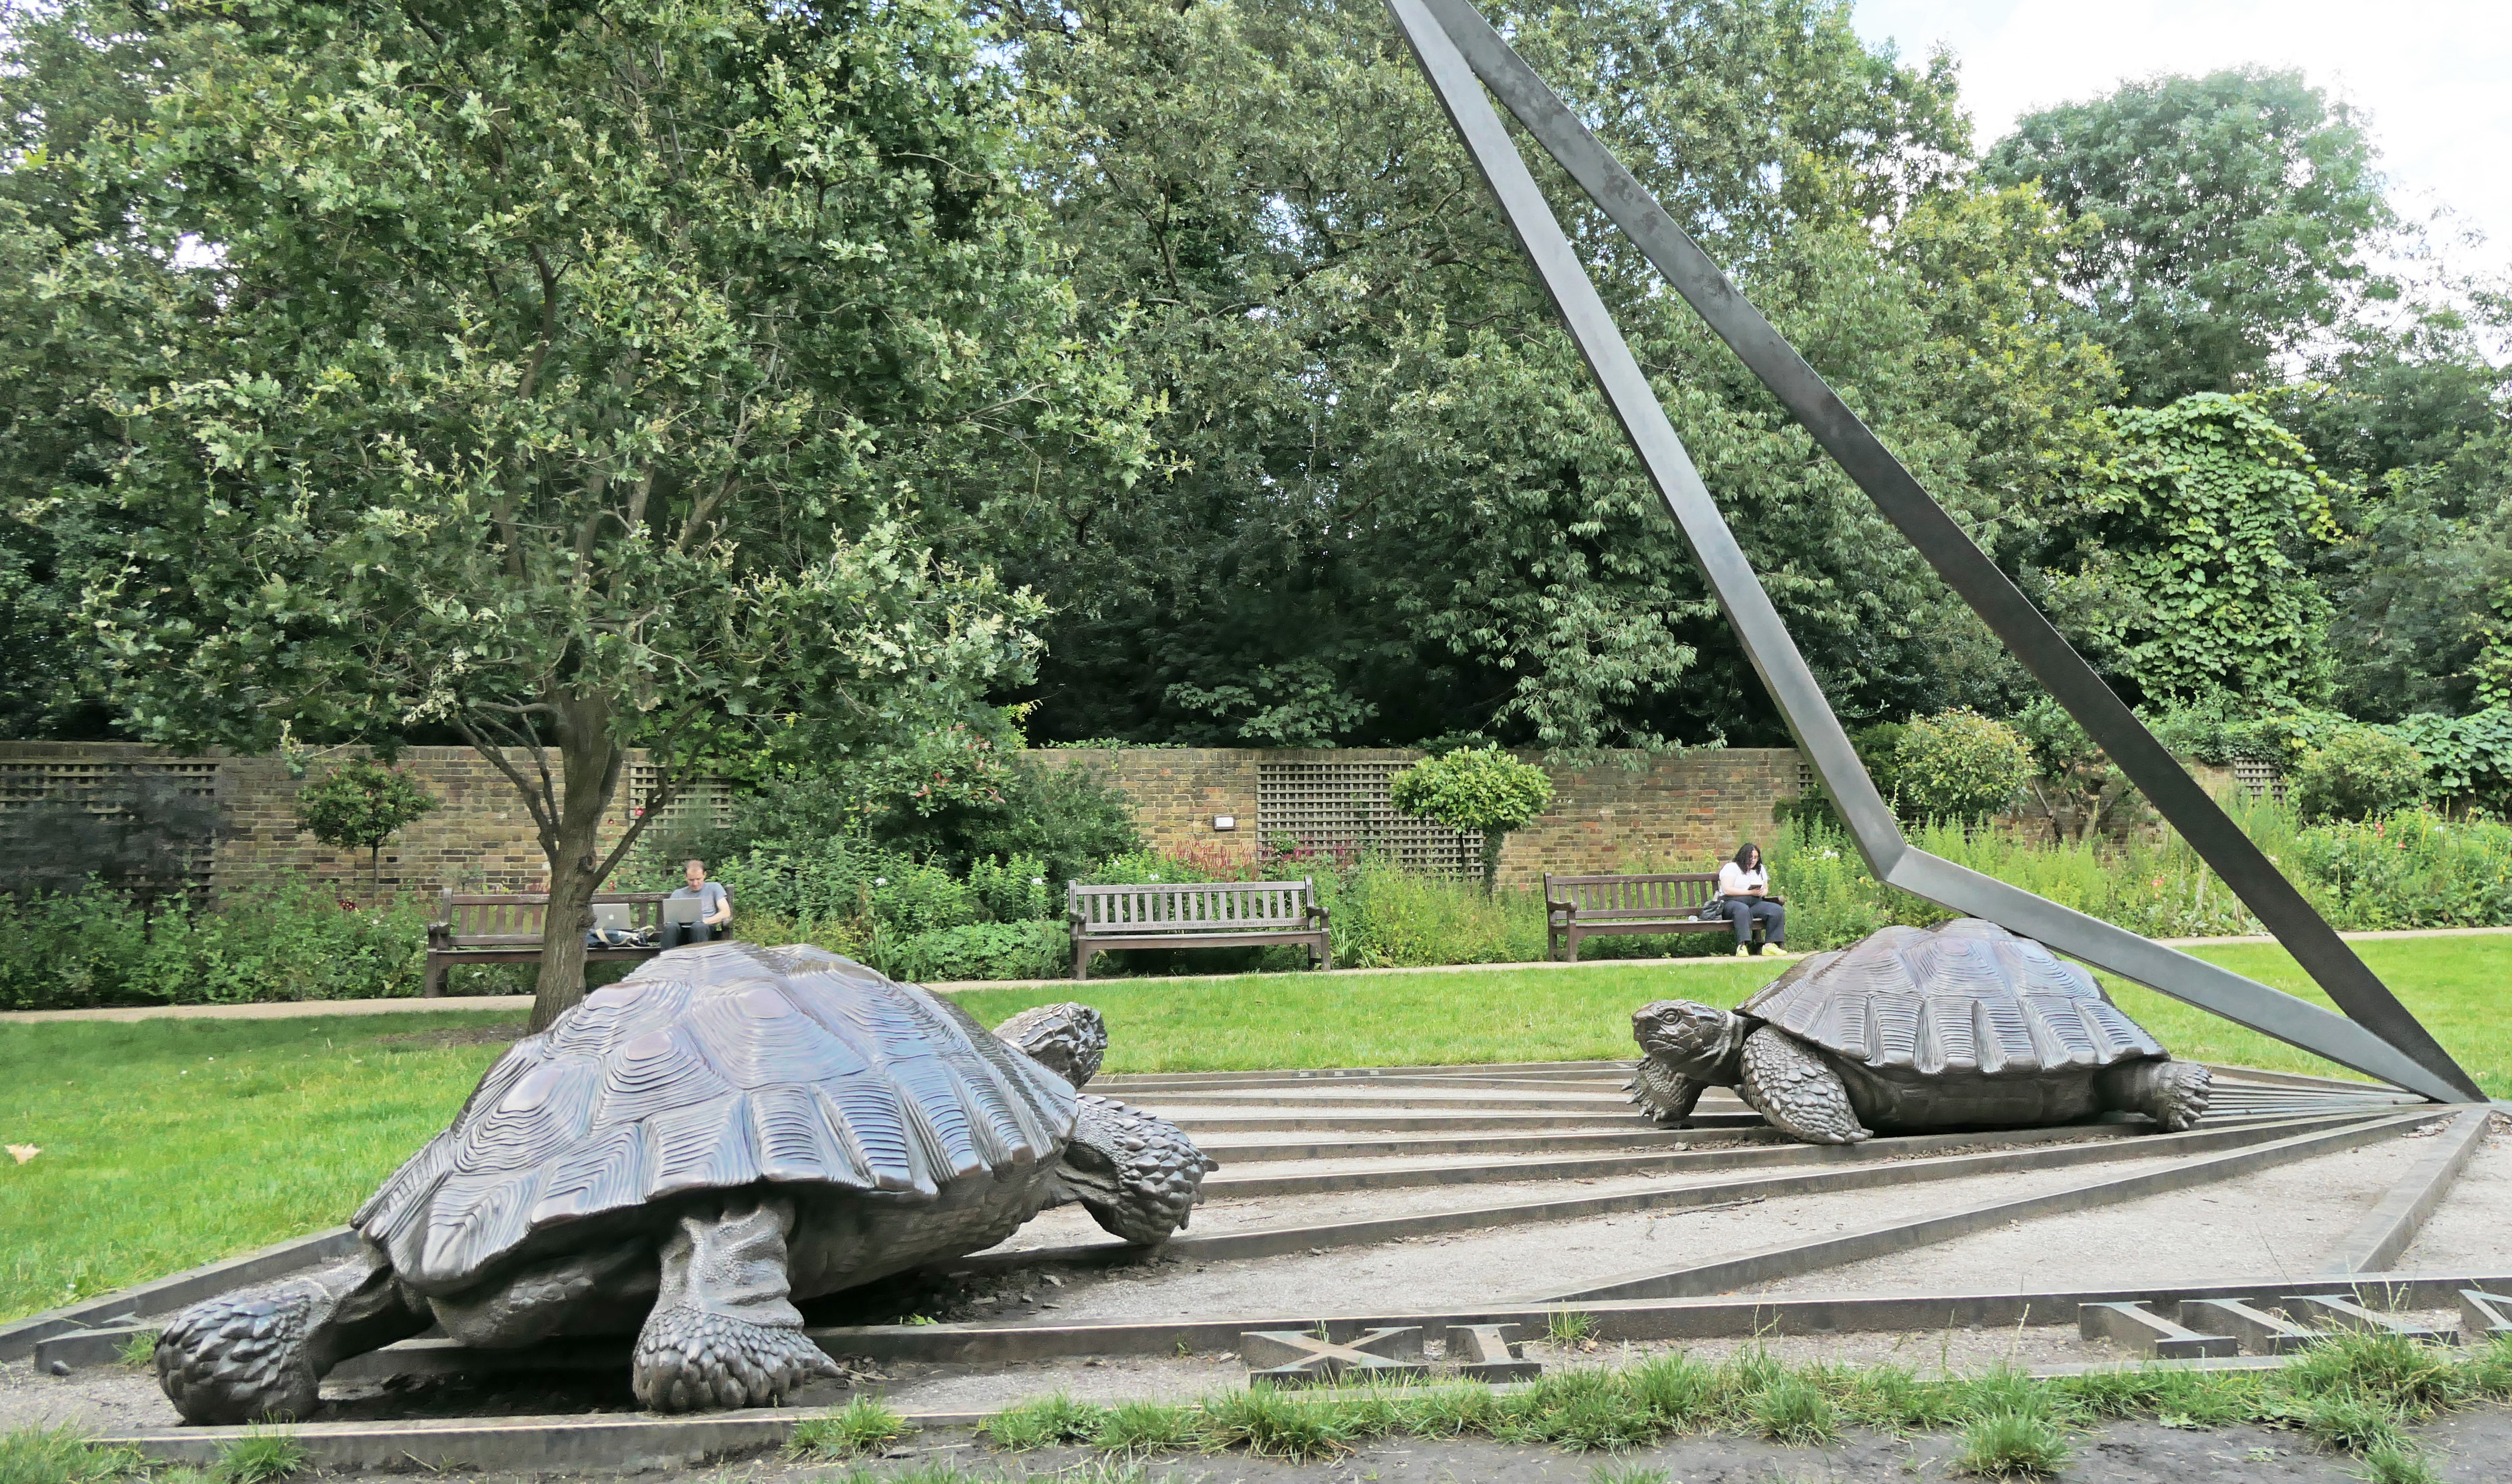 Tortoises with Triangle and Time